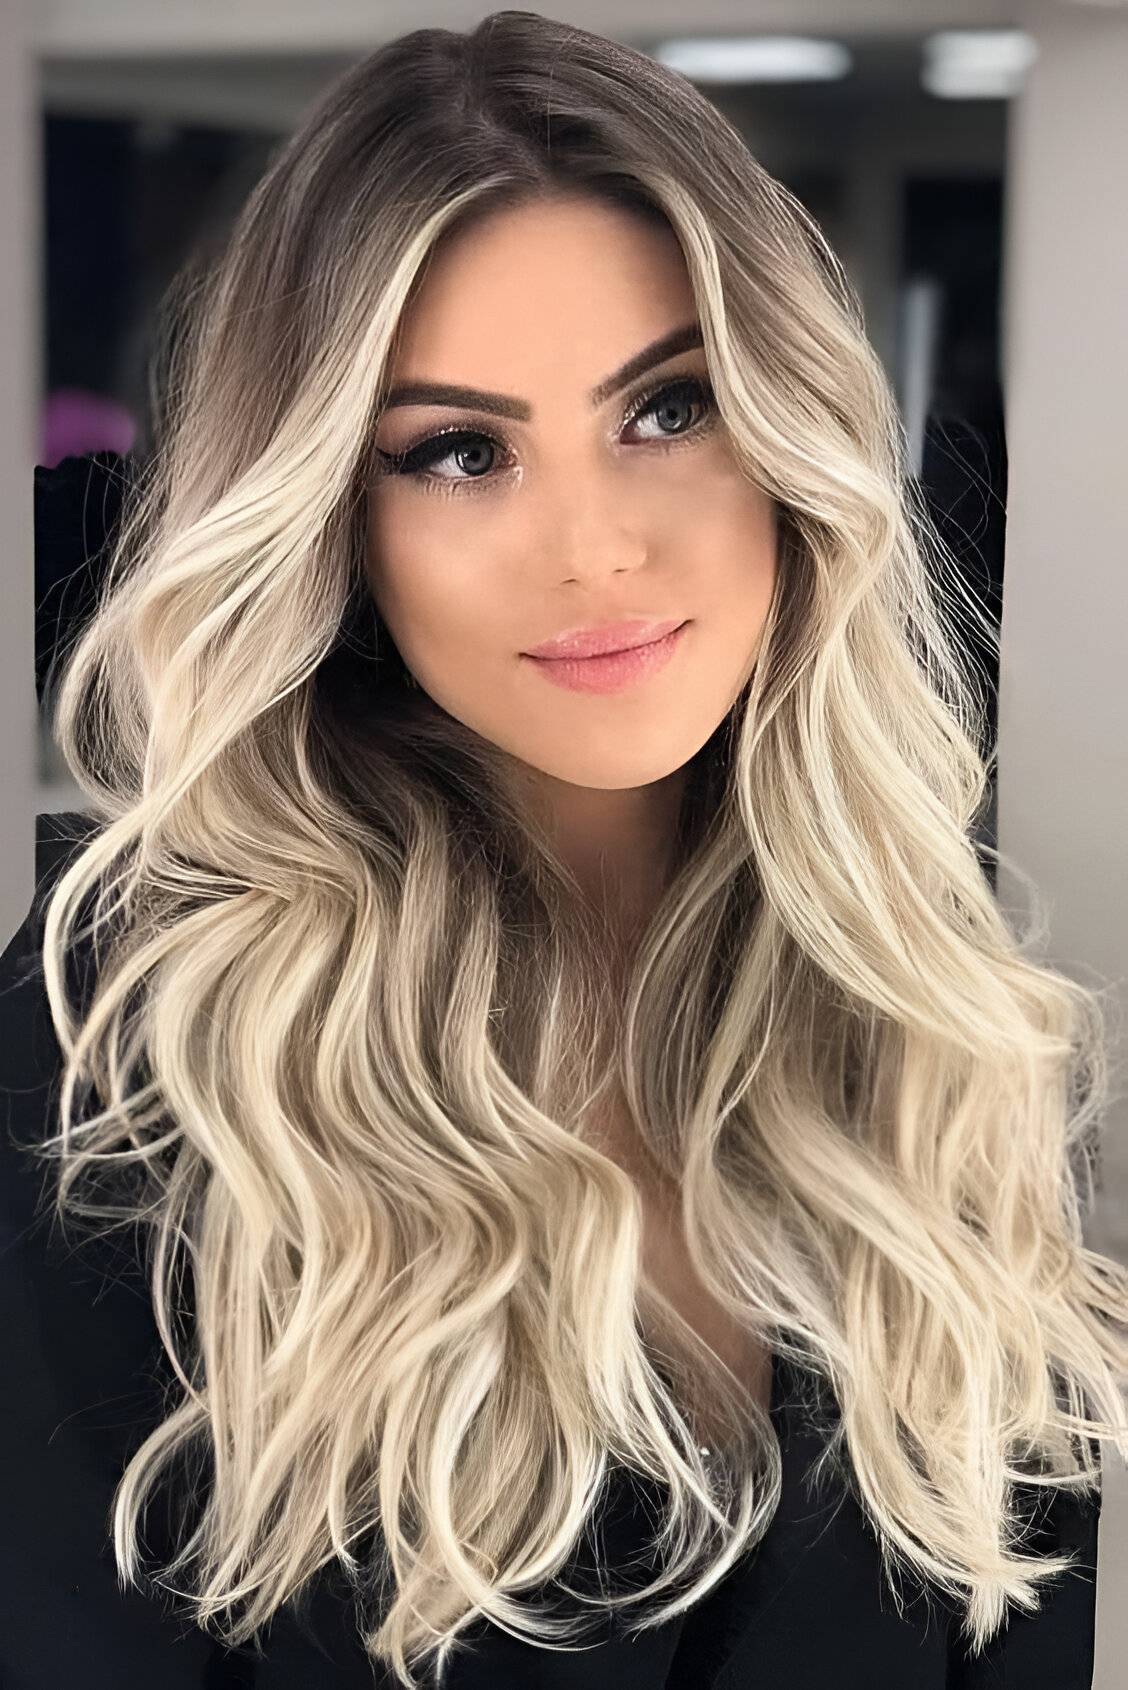 25 Stunning Blonde Highlight Ideas To Make You Gorgeous As A Runway Model - 167